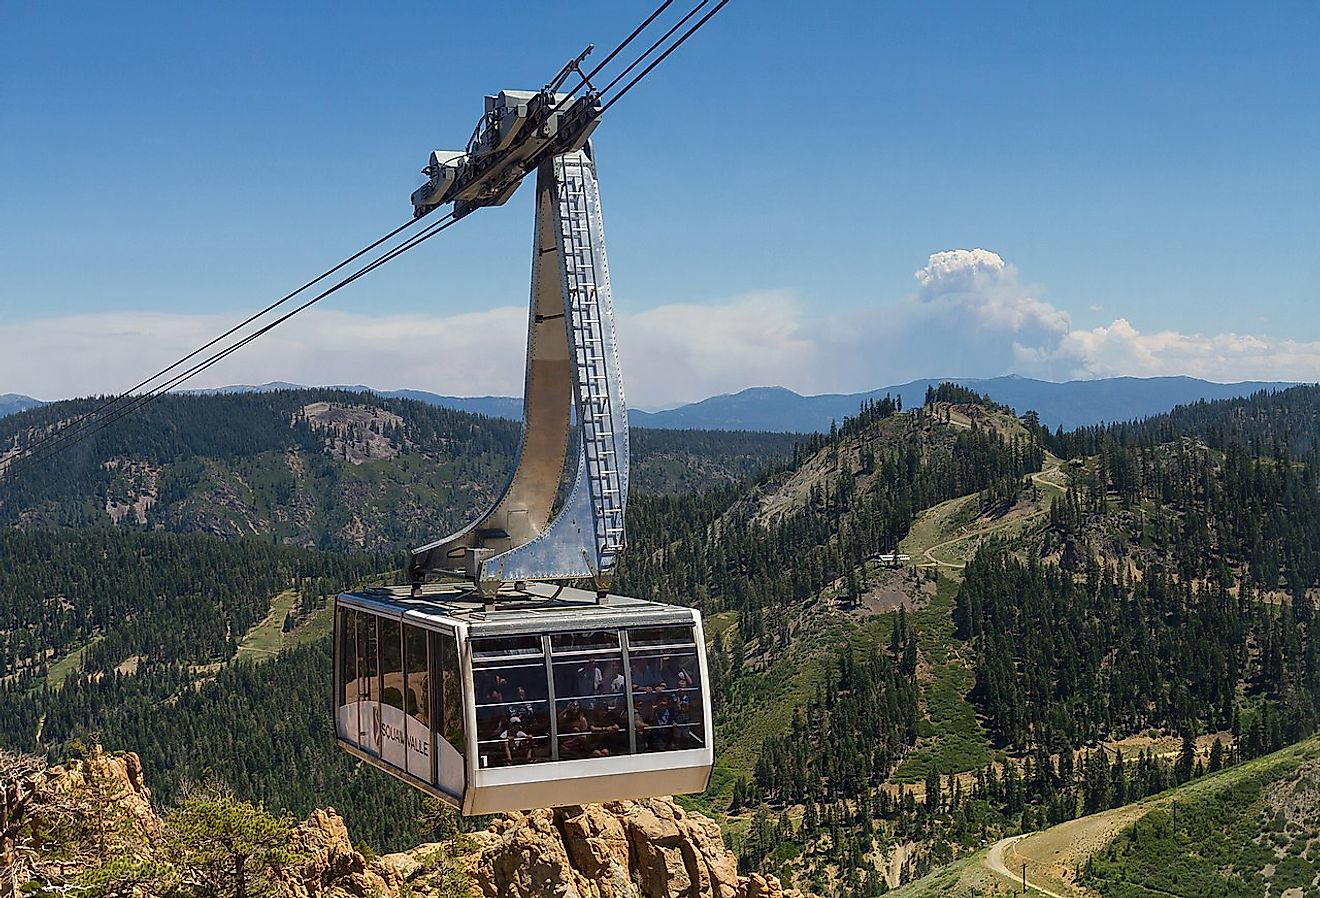  Gondola on its way to the 1960 Winter Olympics High Camp in Squaw Valley, High Sierra. Image credit: © Frank Schulenburg